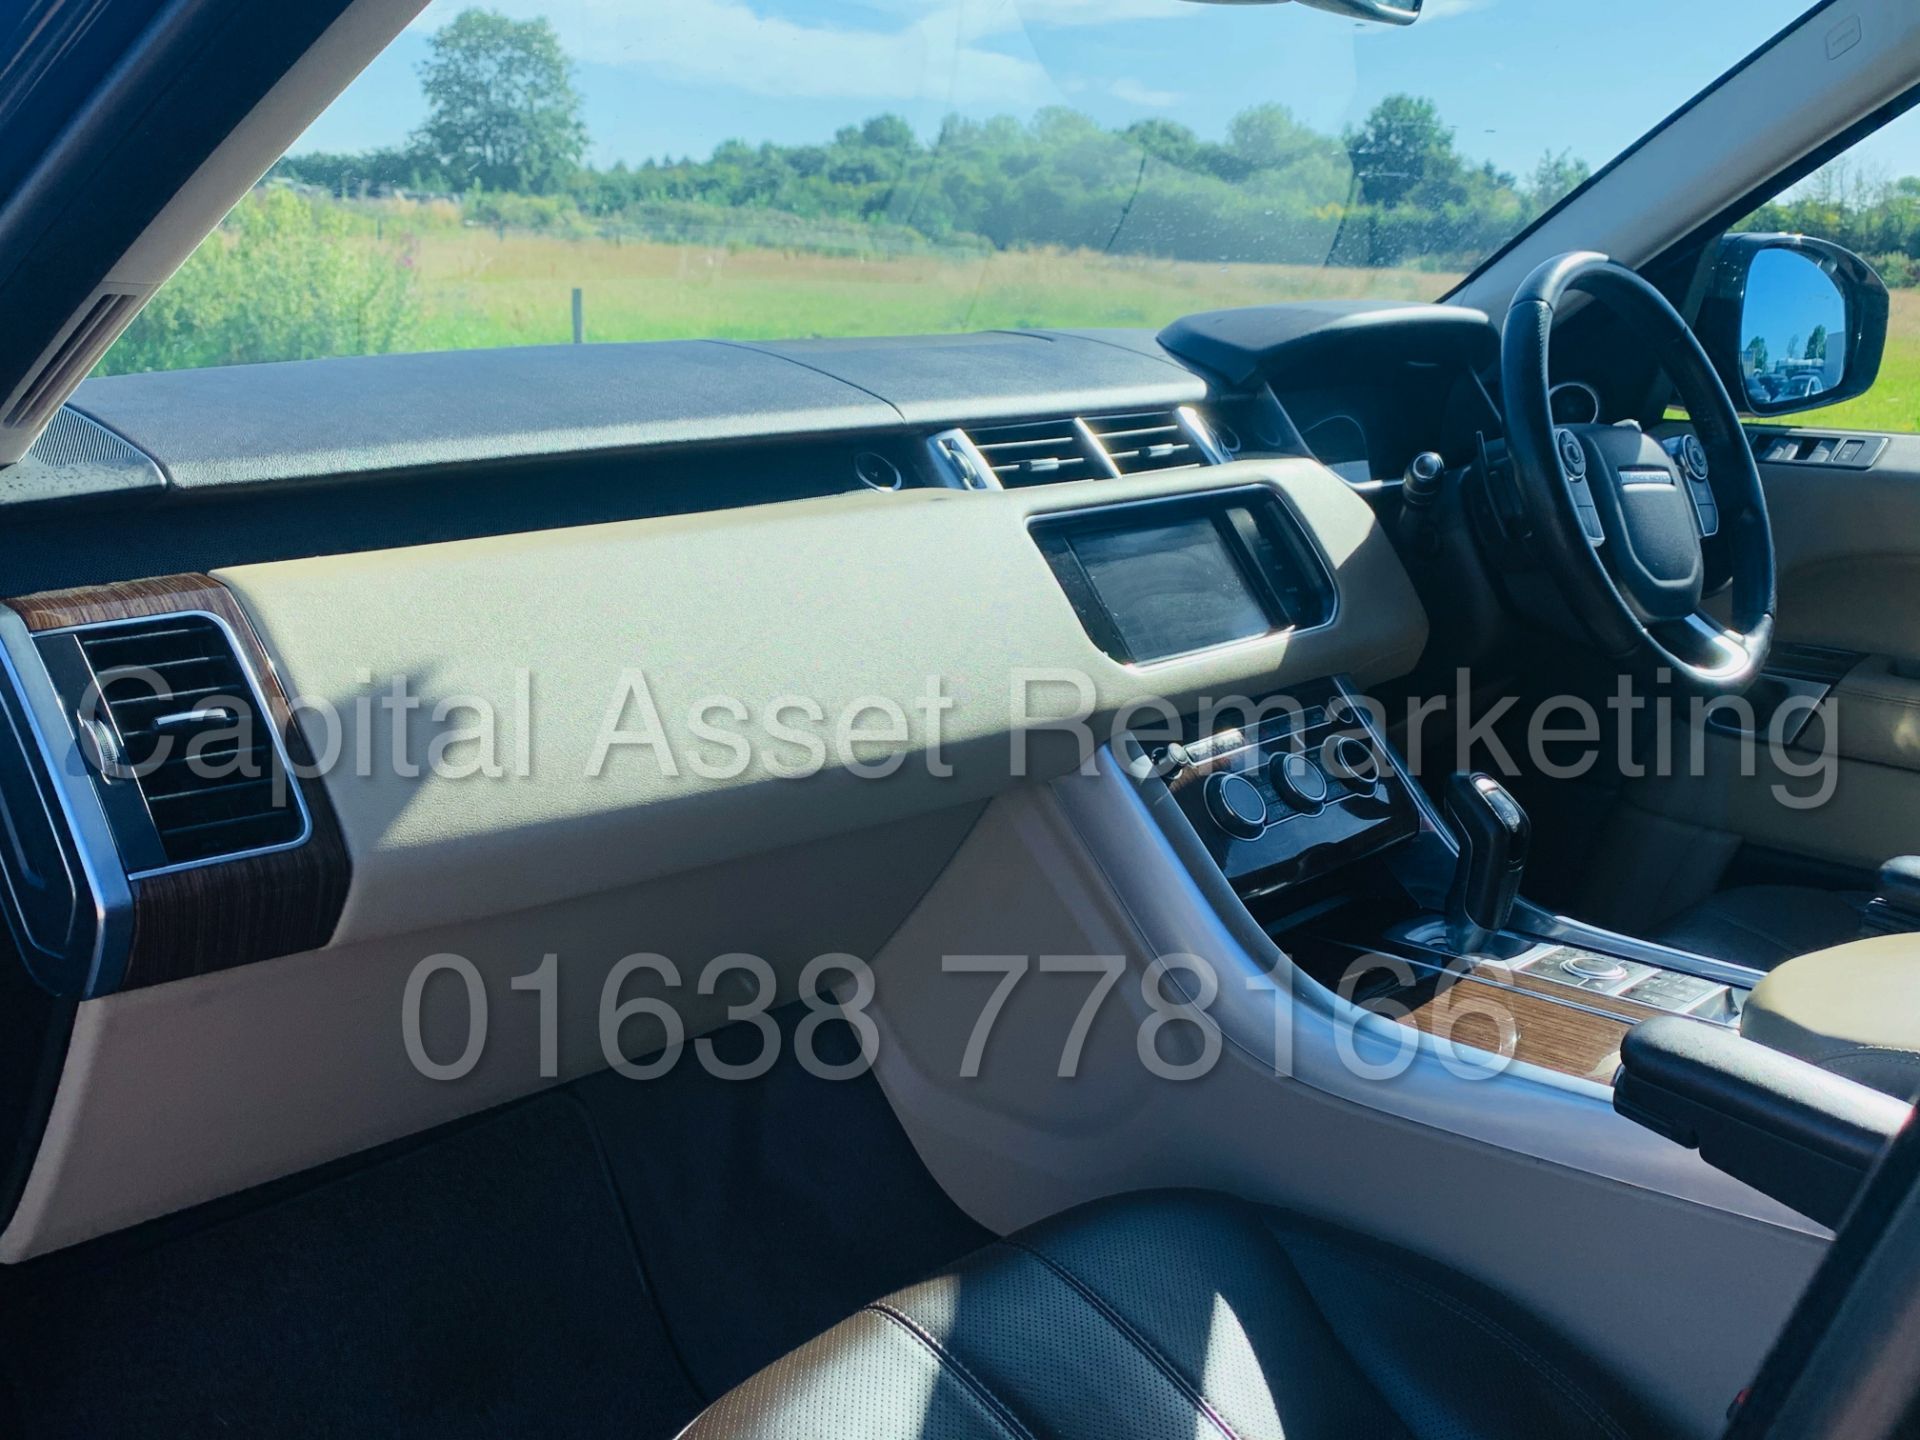 (On Sale) RANGE ROVER SPORT *HSE* 5 DOOR SUV (2015 MODEL) '3.0 SDV6 - 8 SPEED AUTO' *FULLY LOADED* - Image 23 of 59